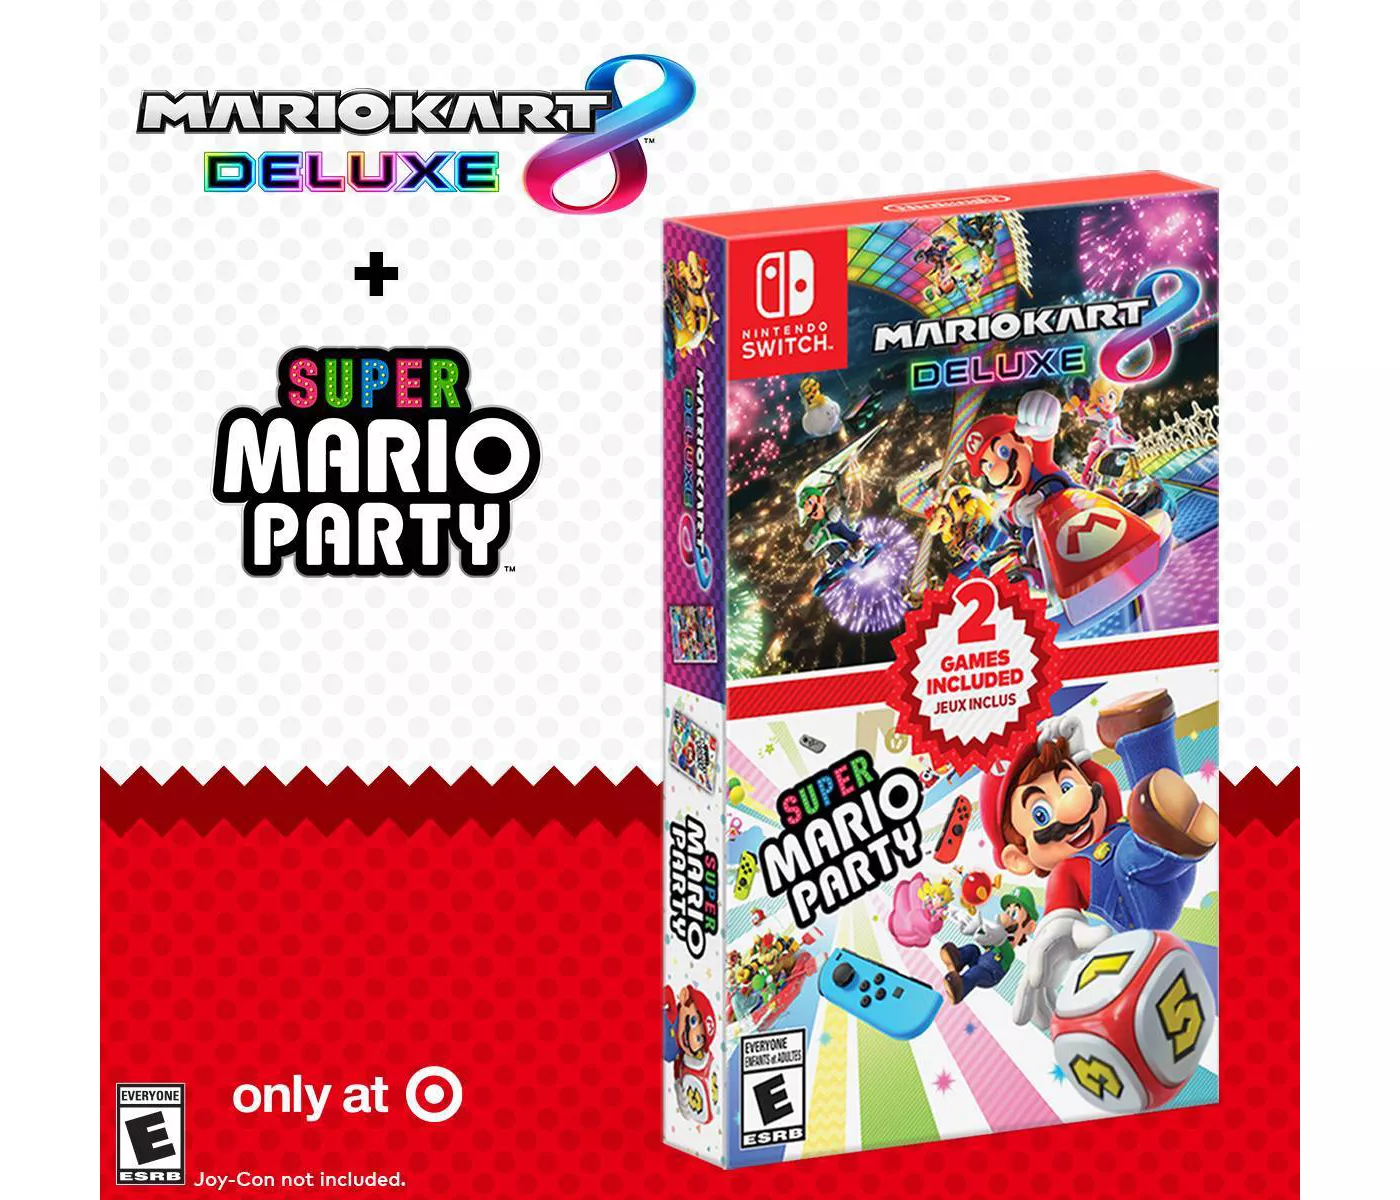 Mario Kart 8 Deluxe + Super Mario Party Double Pack - Nintendo Switch - image 3 of 10